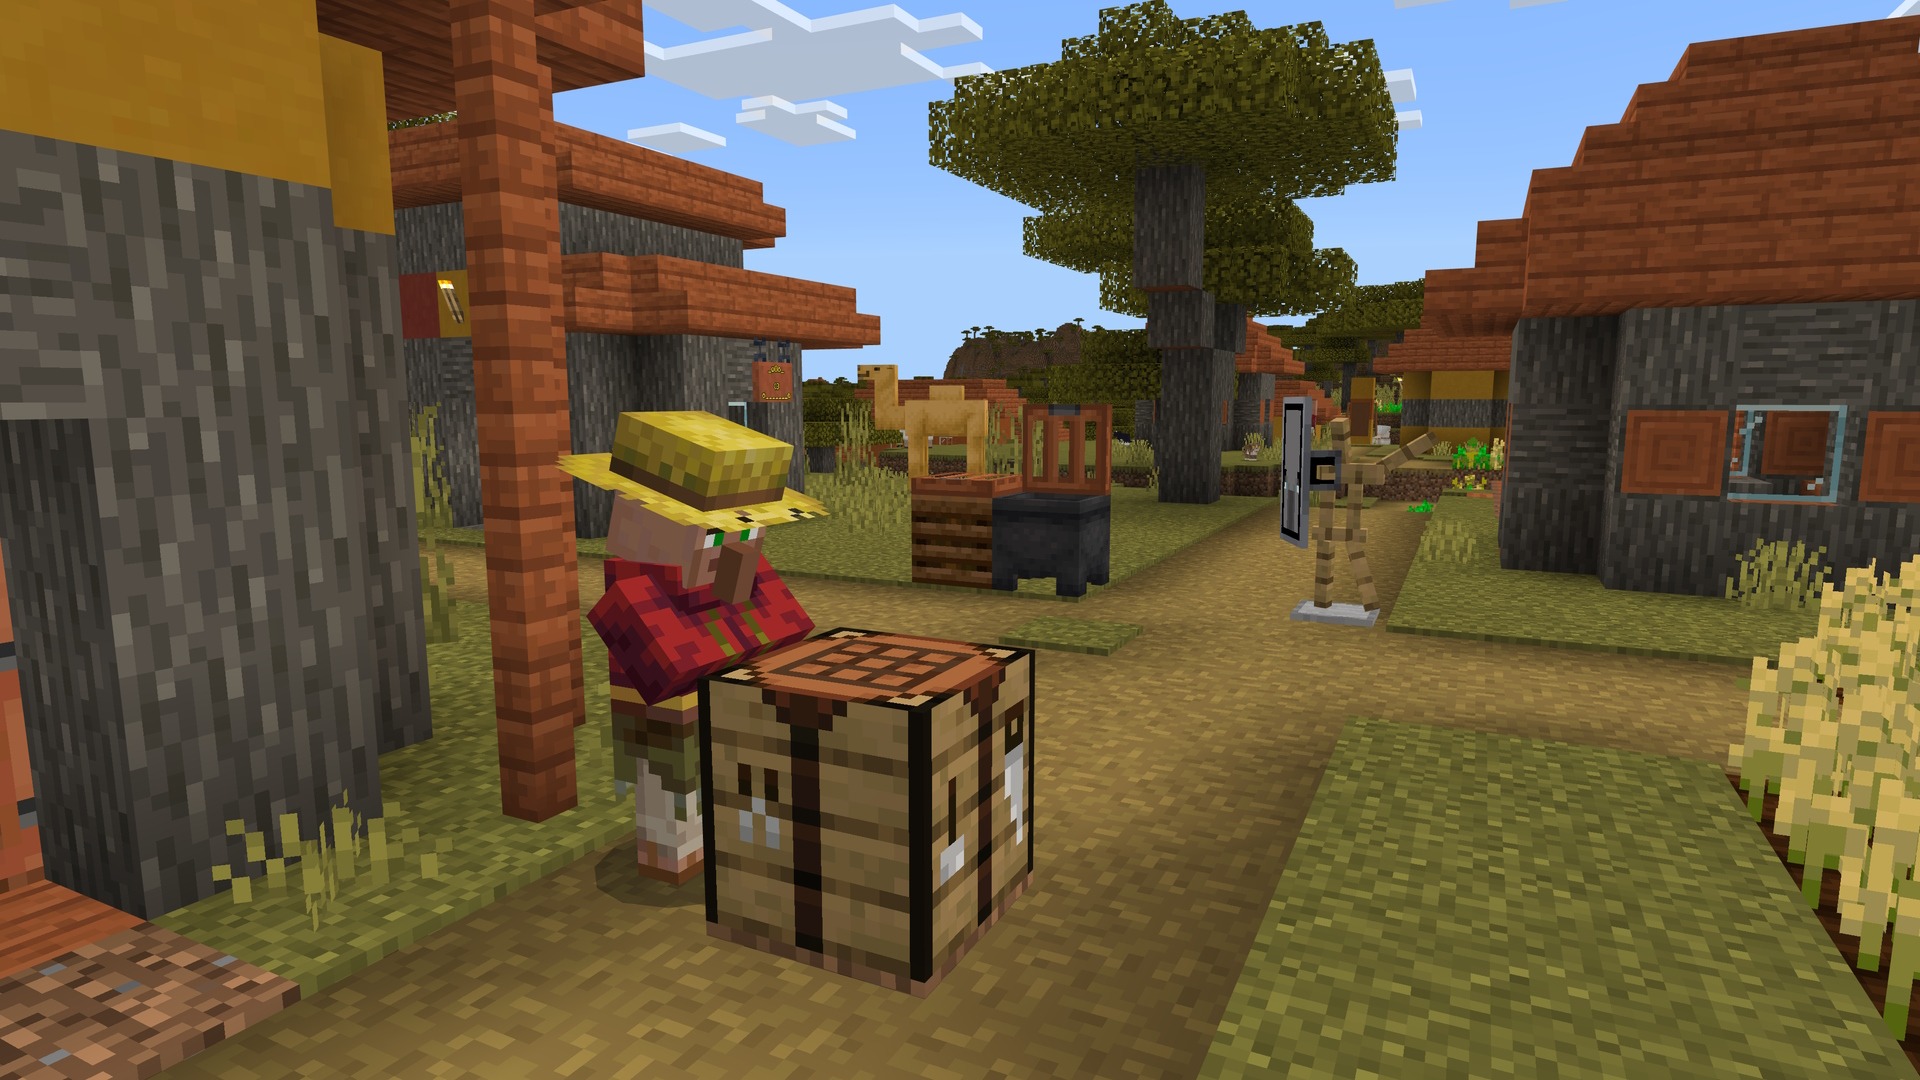 A Minecraft screenshot featuring a villager standing beside a crafting table. There is an armour stand in the background, with a camel nearby, too.